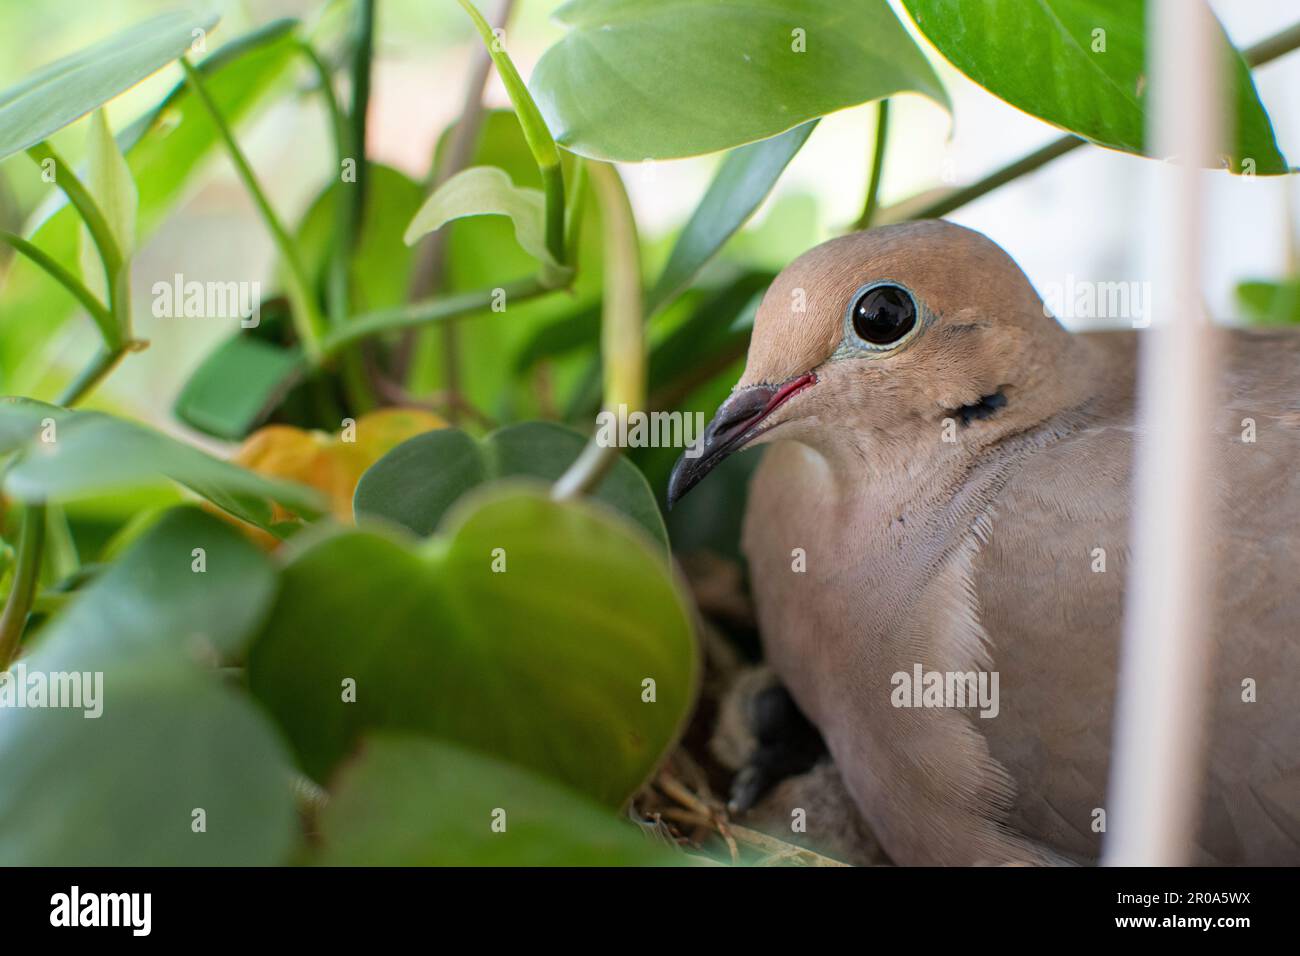 A cute mourning dove in a nest in the hanging basket Stock Photo